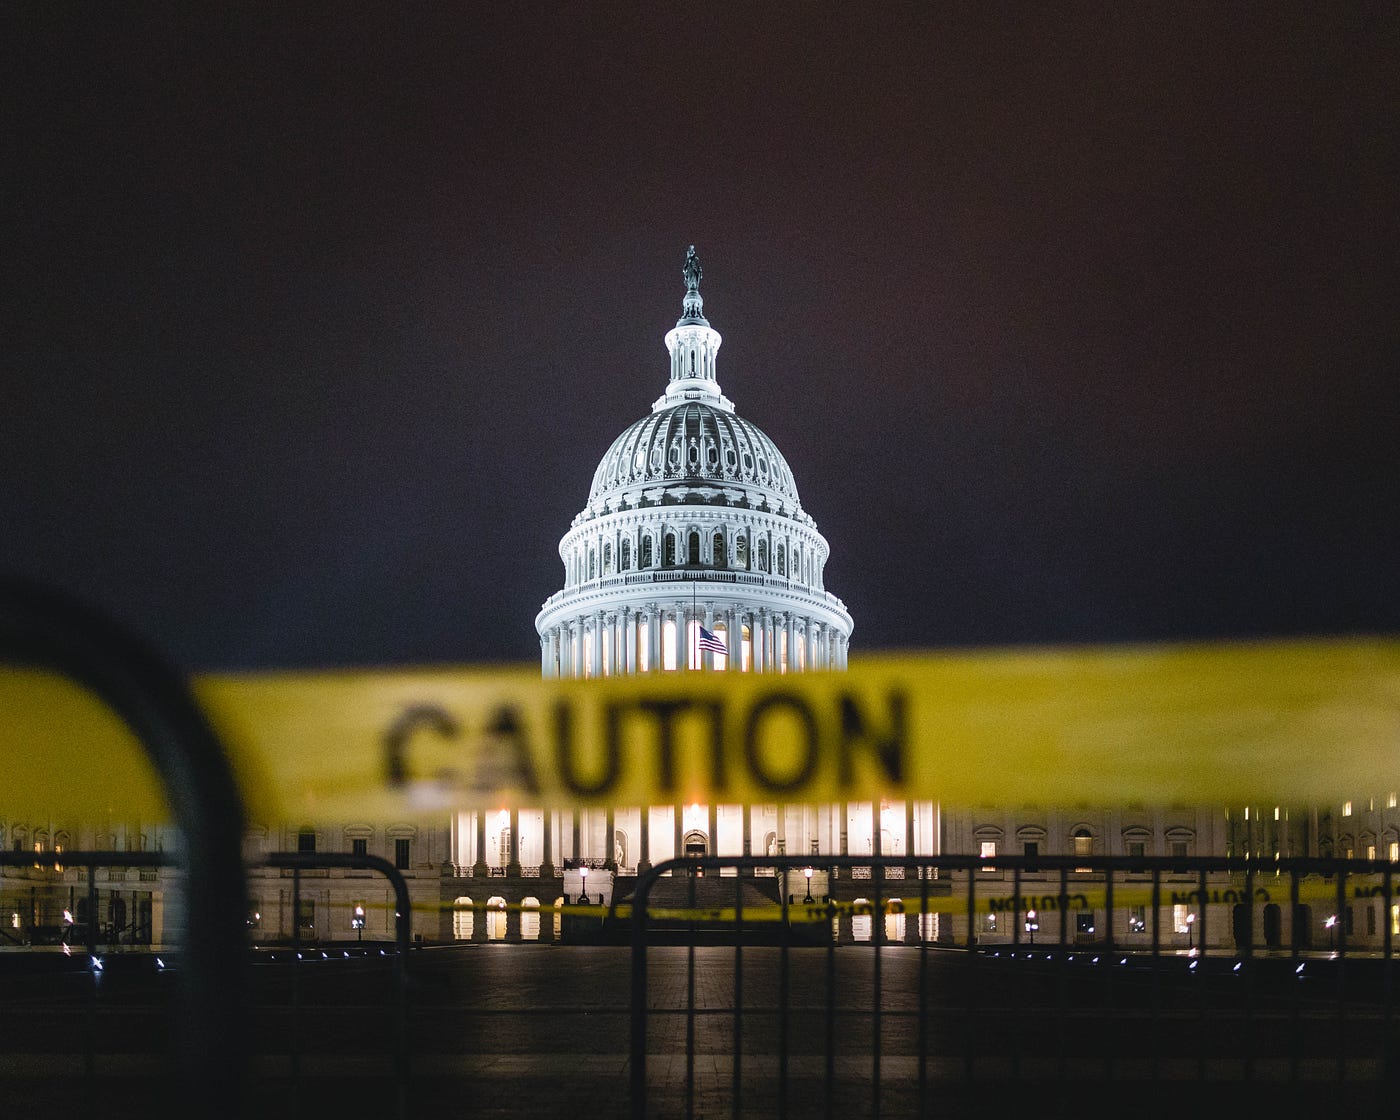 Washington, DC Capitol building at night, with a yellow caution tape in the foreground.